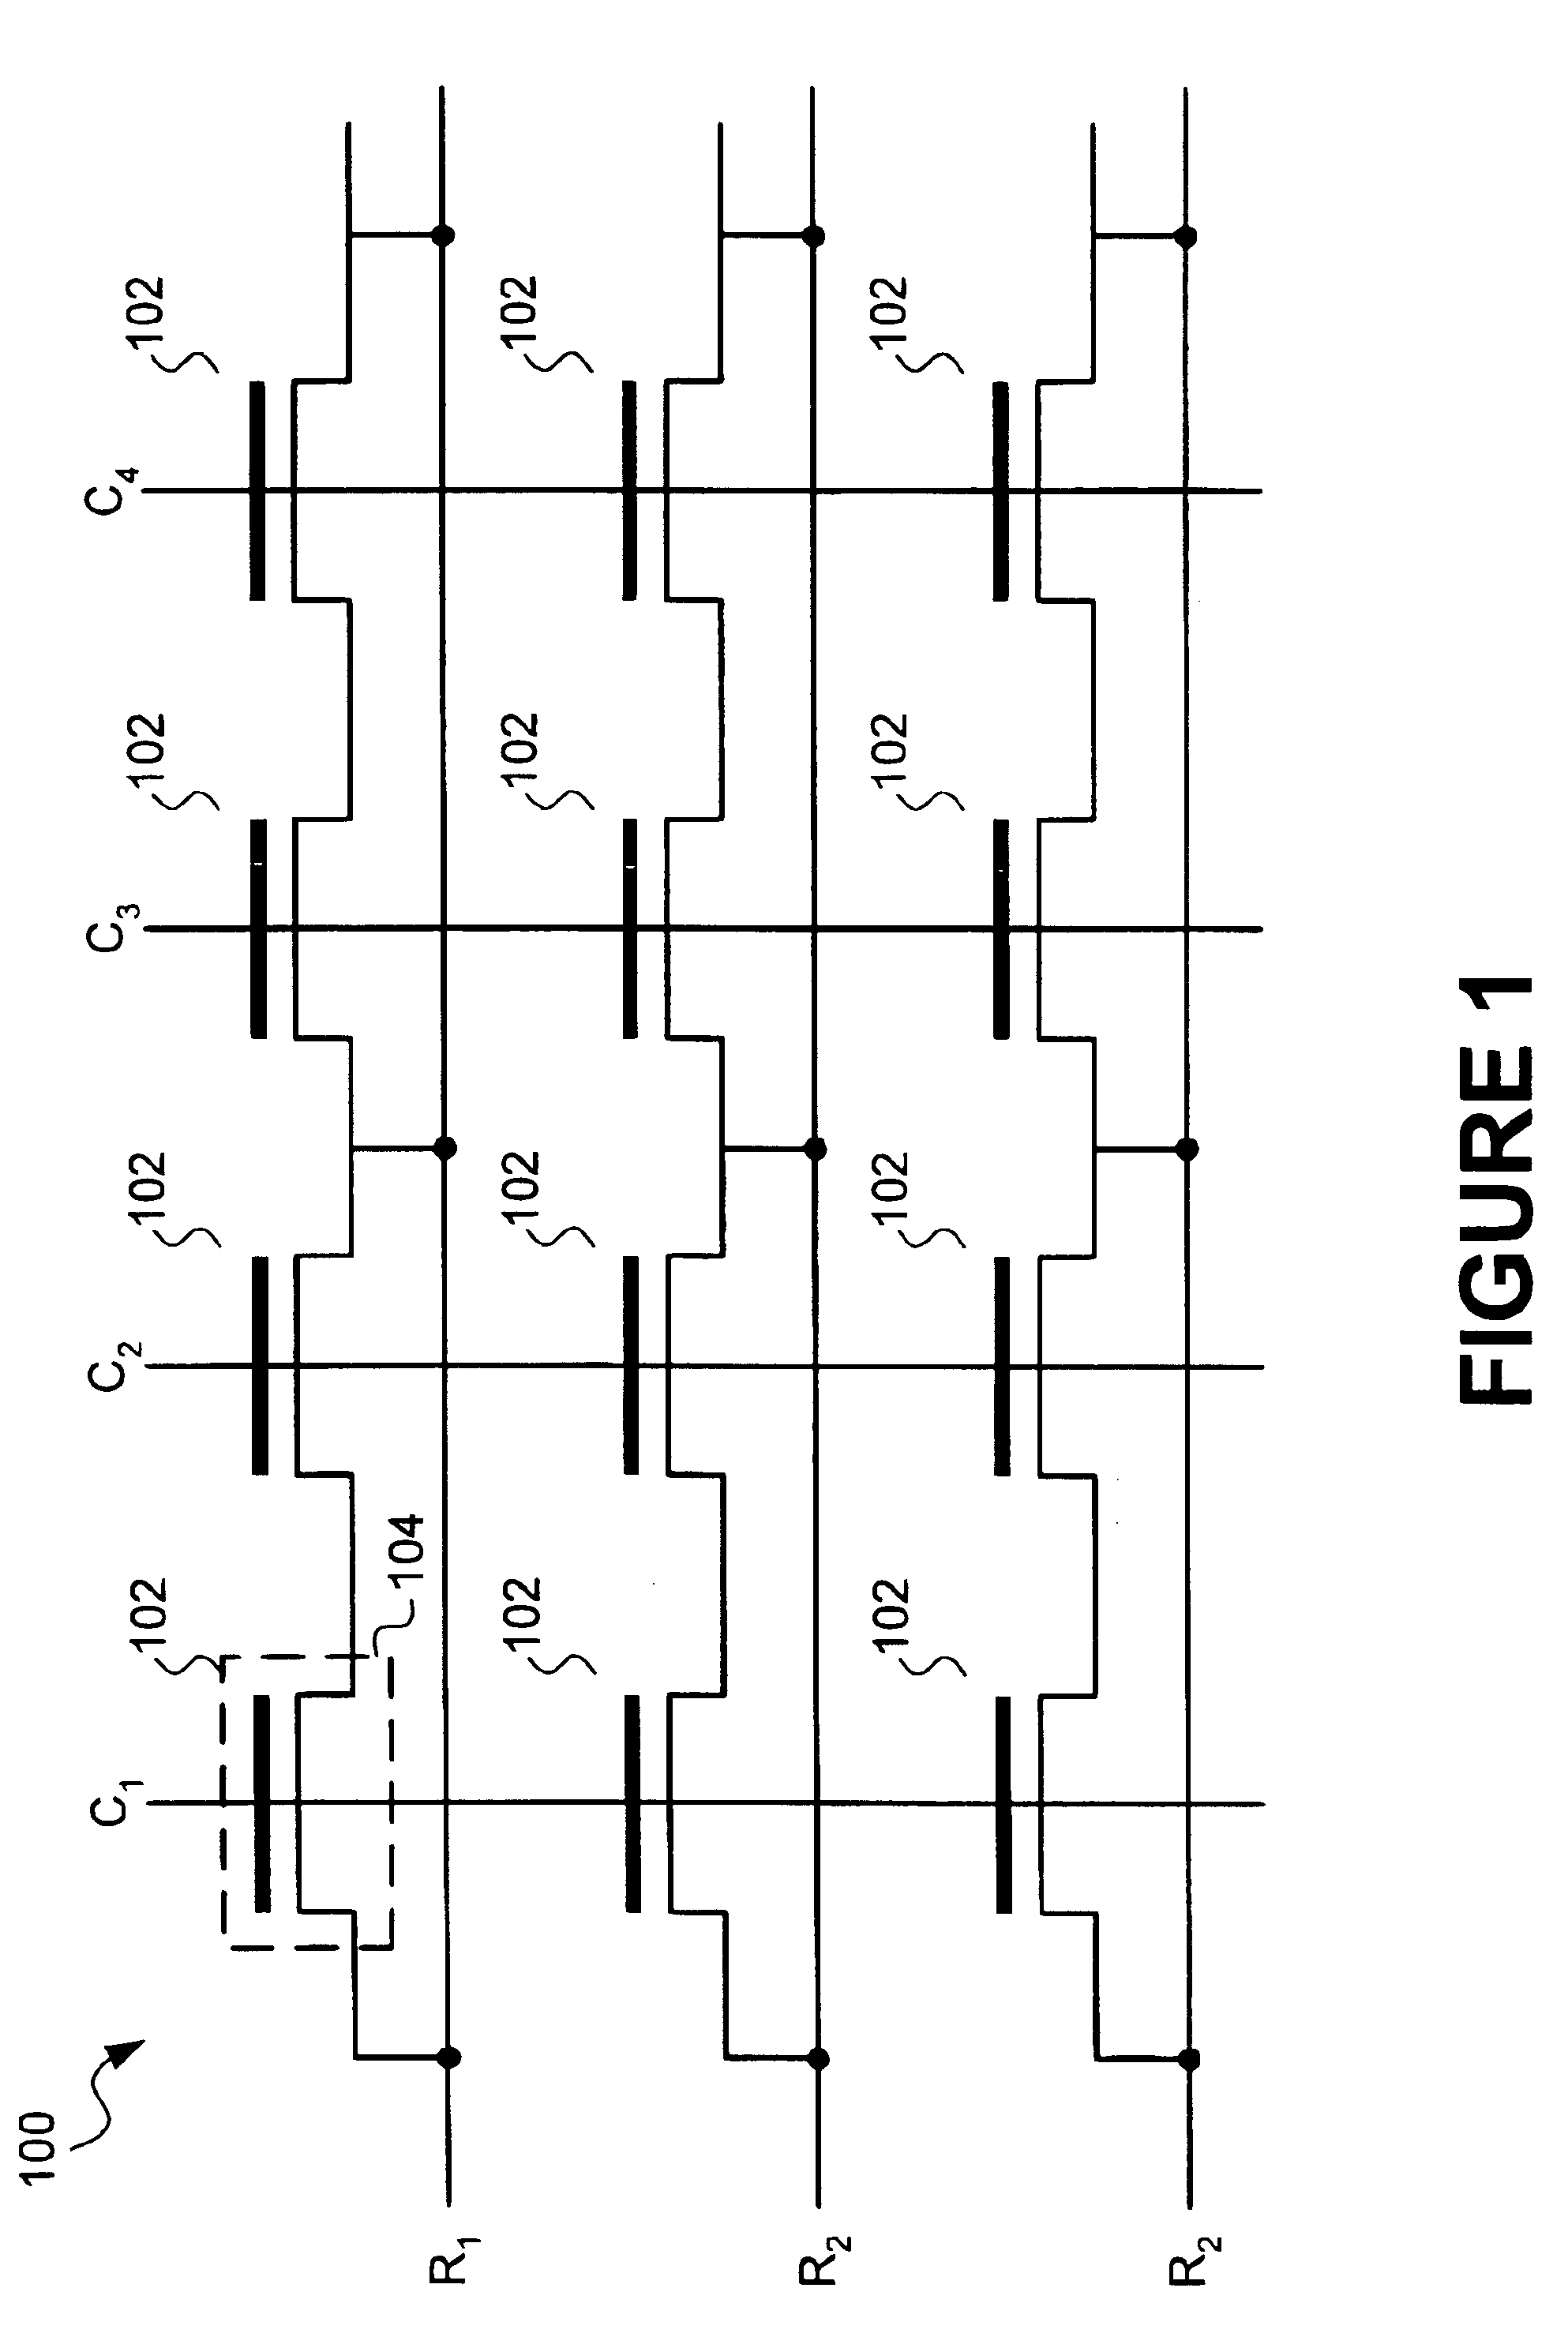 High density semiconductor memory cell and memory array using a single transistor and having variable gate oxide breakdown